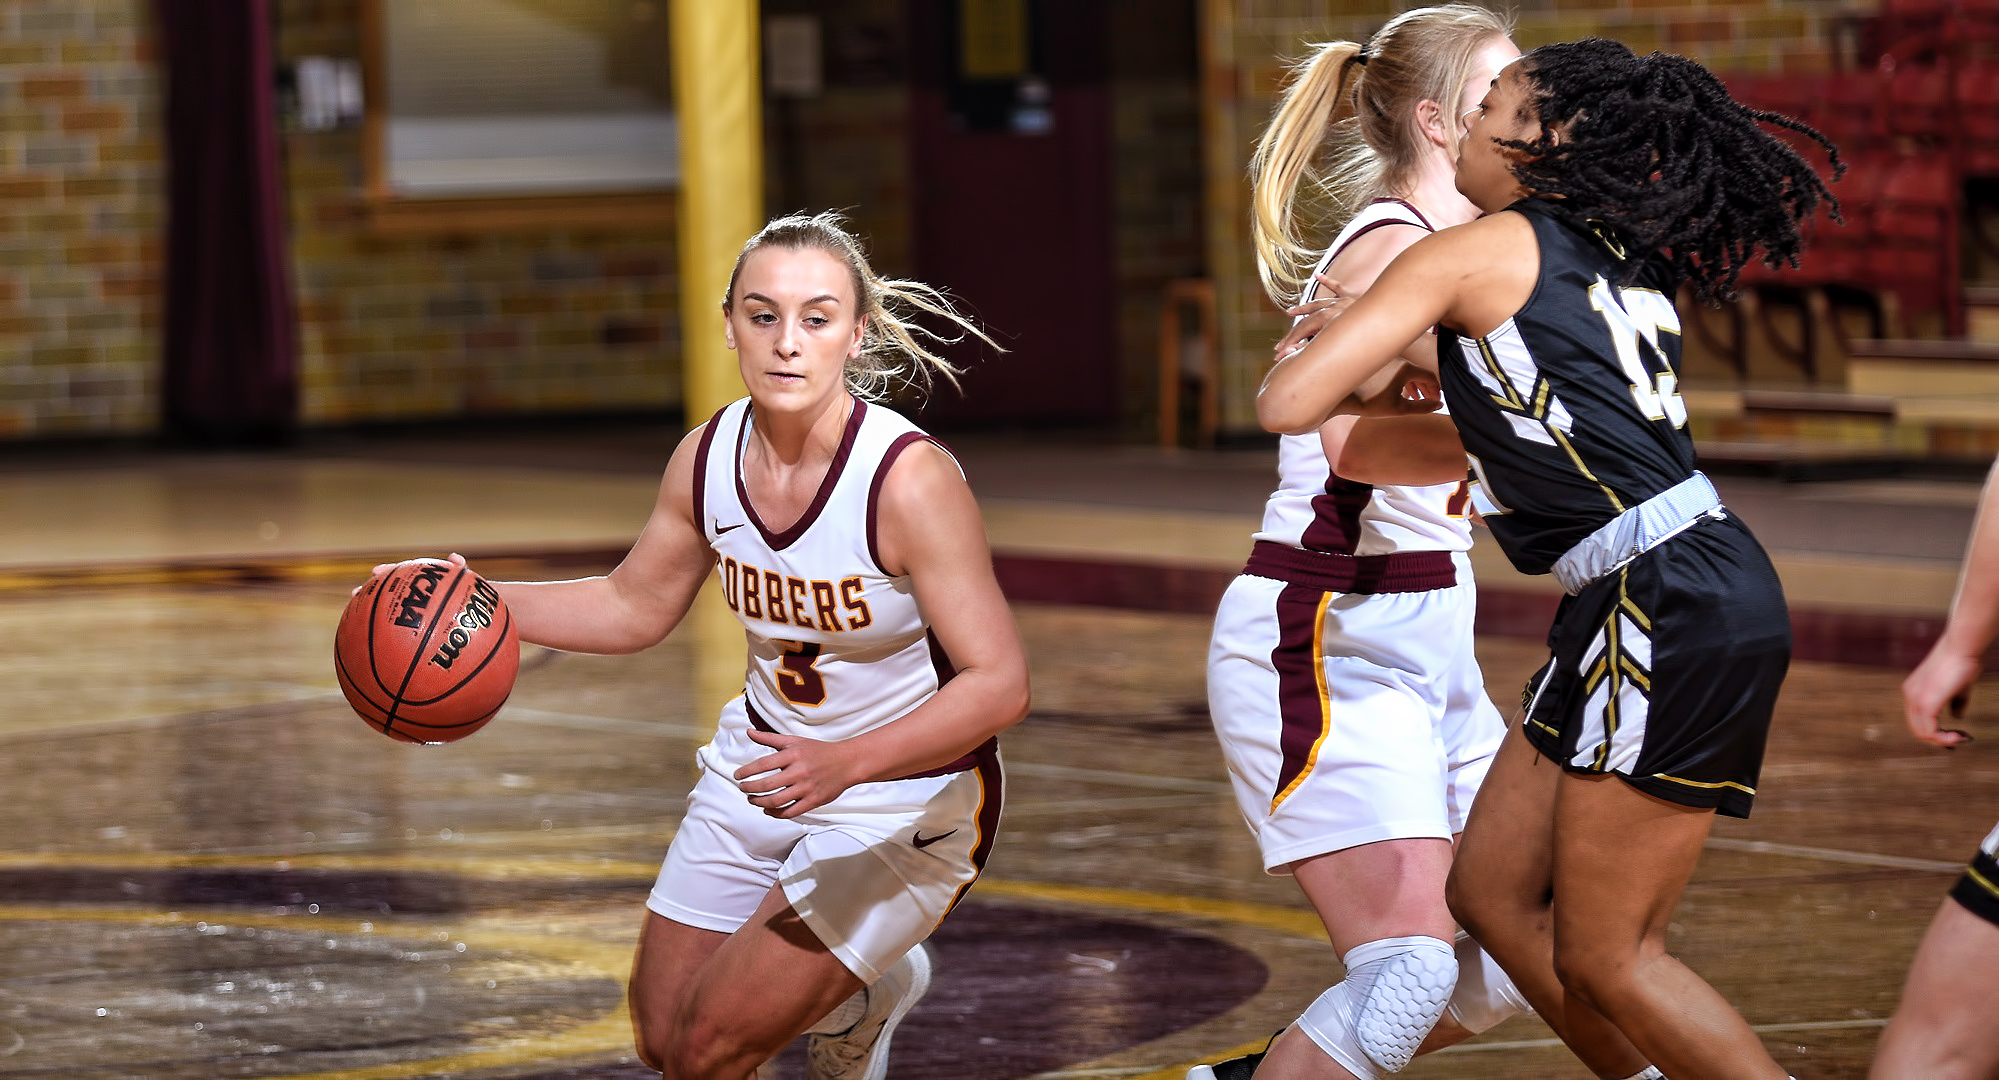 Sophomore Autumn Thompson cuts around a ball screen on the way to the basket in the first half of the Cobbers' OT win over St. Olaf. Thompson finished with a team-high 20 points.